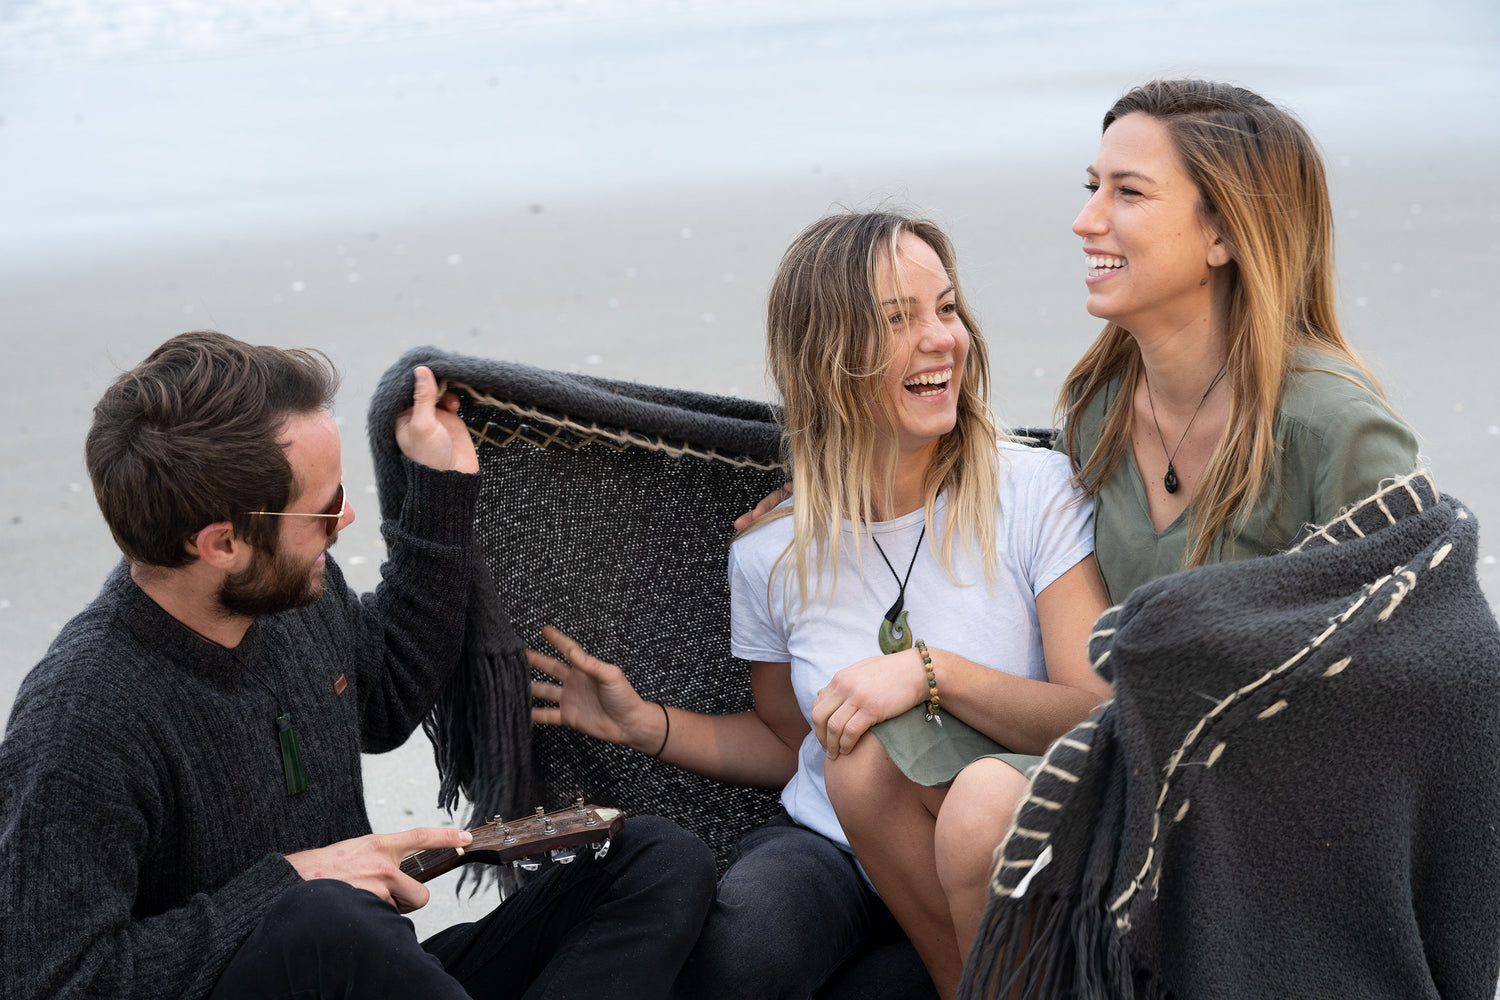 Our pounamu gift guide for the wonderfully different people in your life.